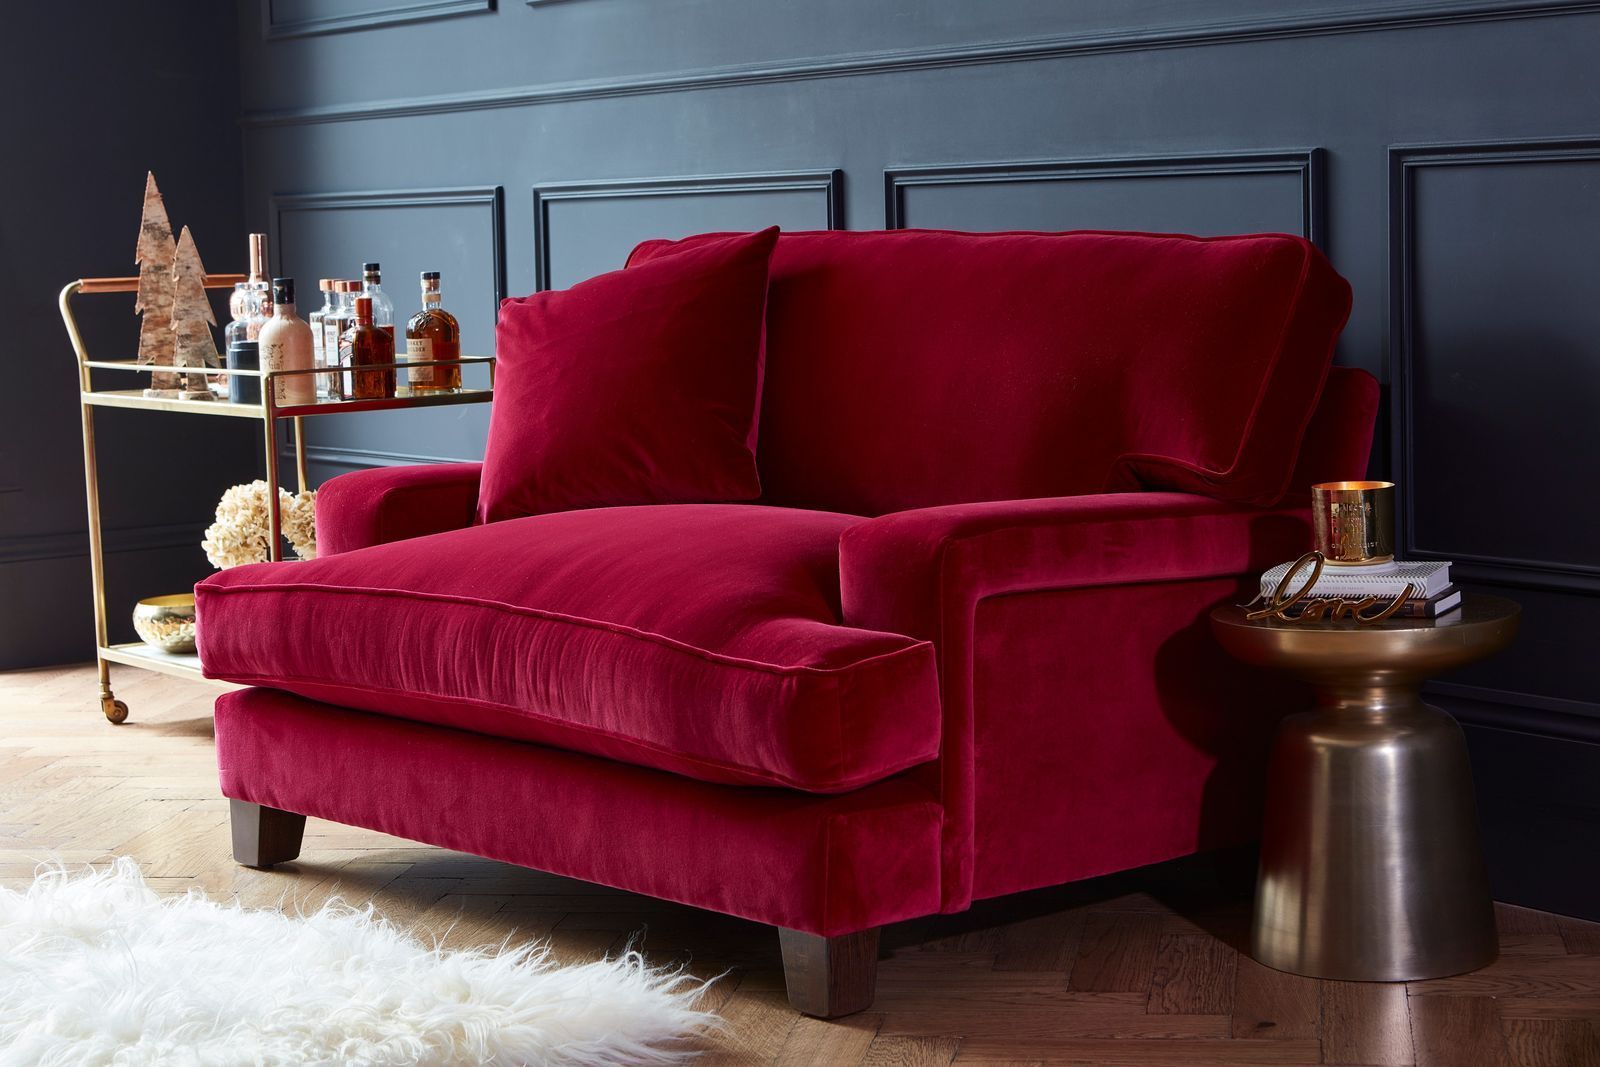 The Best Loveseats To Snuggle Up In | Velvet Sofa Living Room, Red Throughout Small Love Seats In Velvet (Gallery 1 of 21)